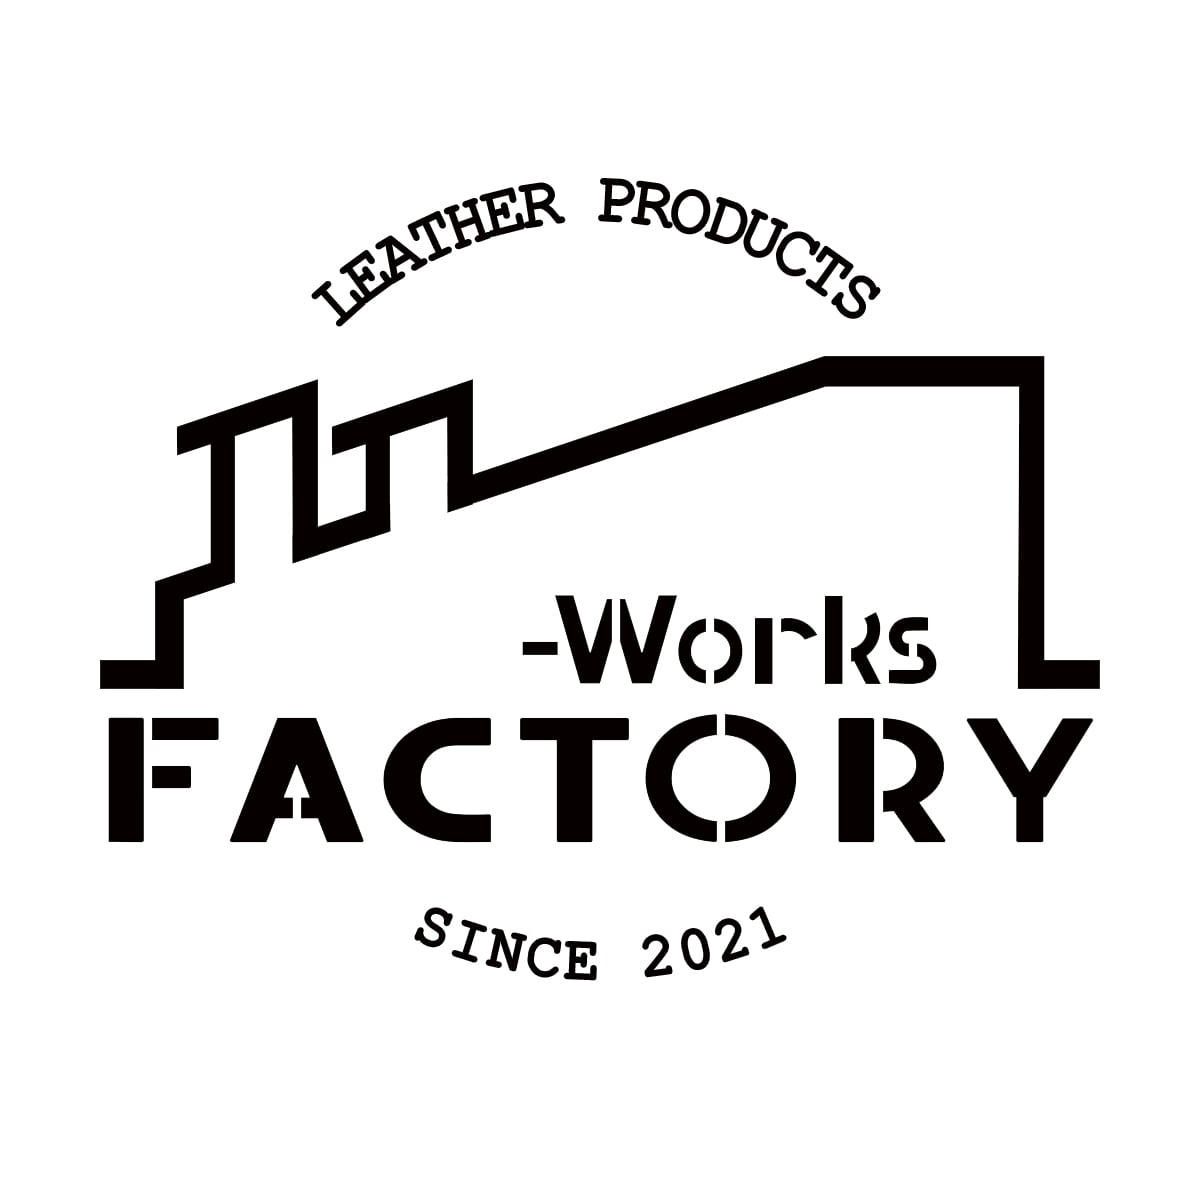 11-Works Factory～革のソムリエが営むお店～